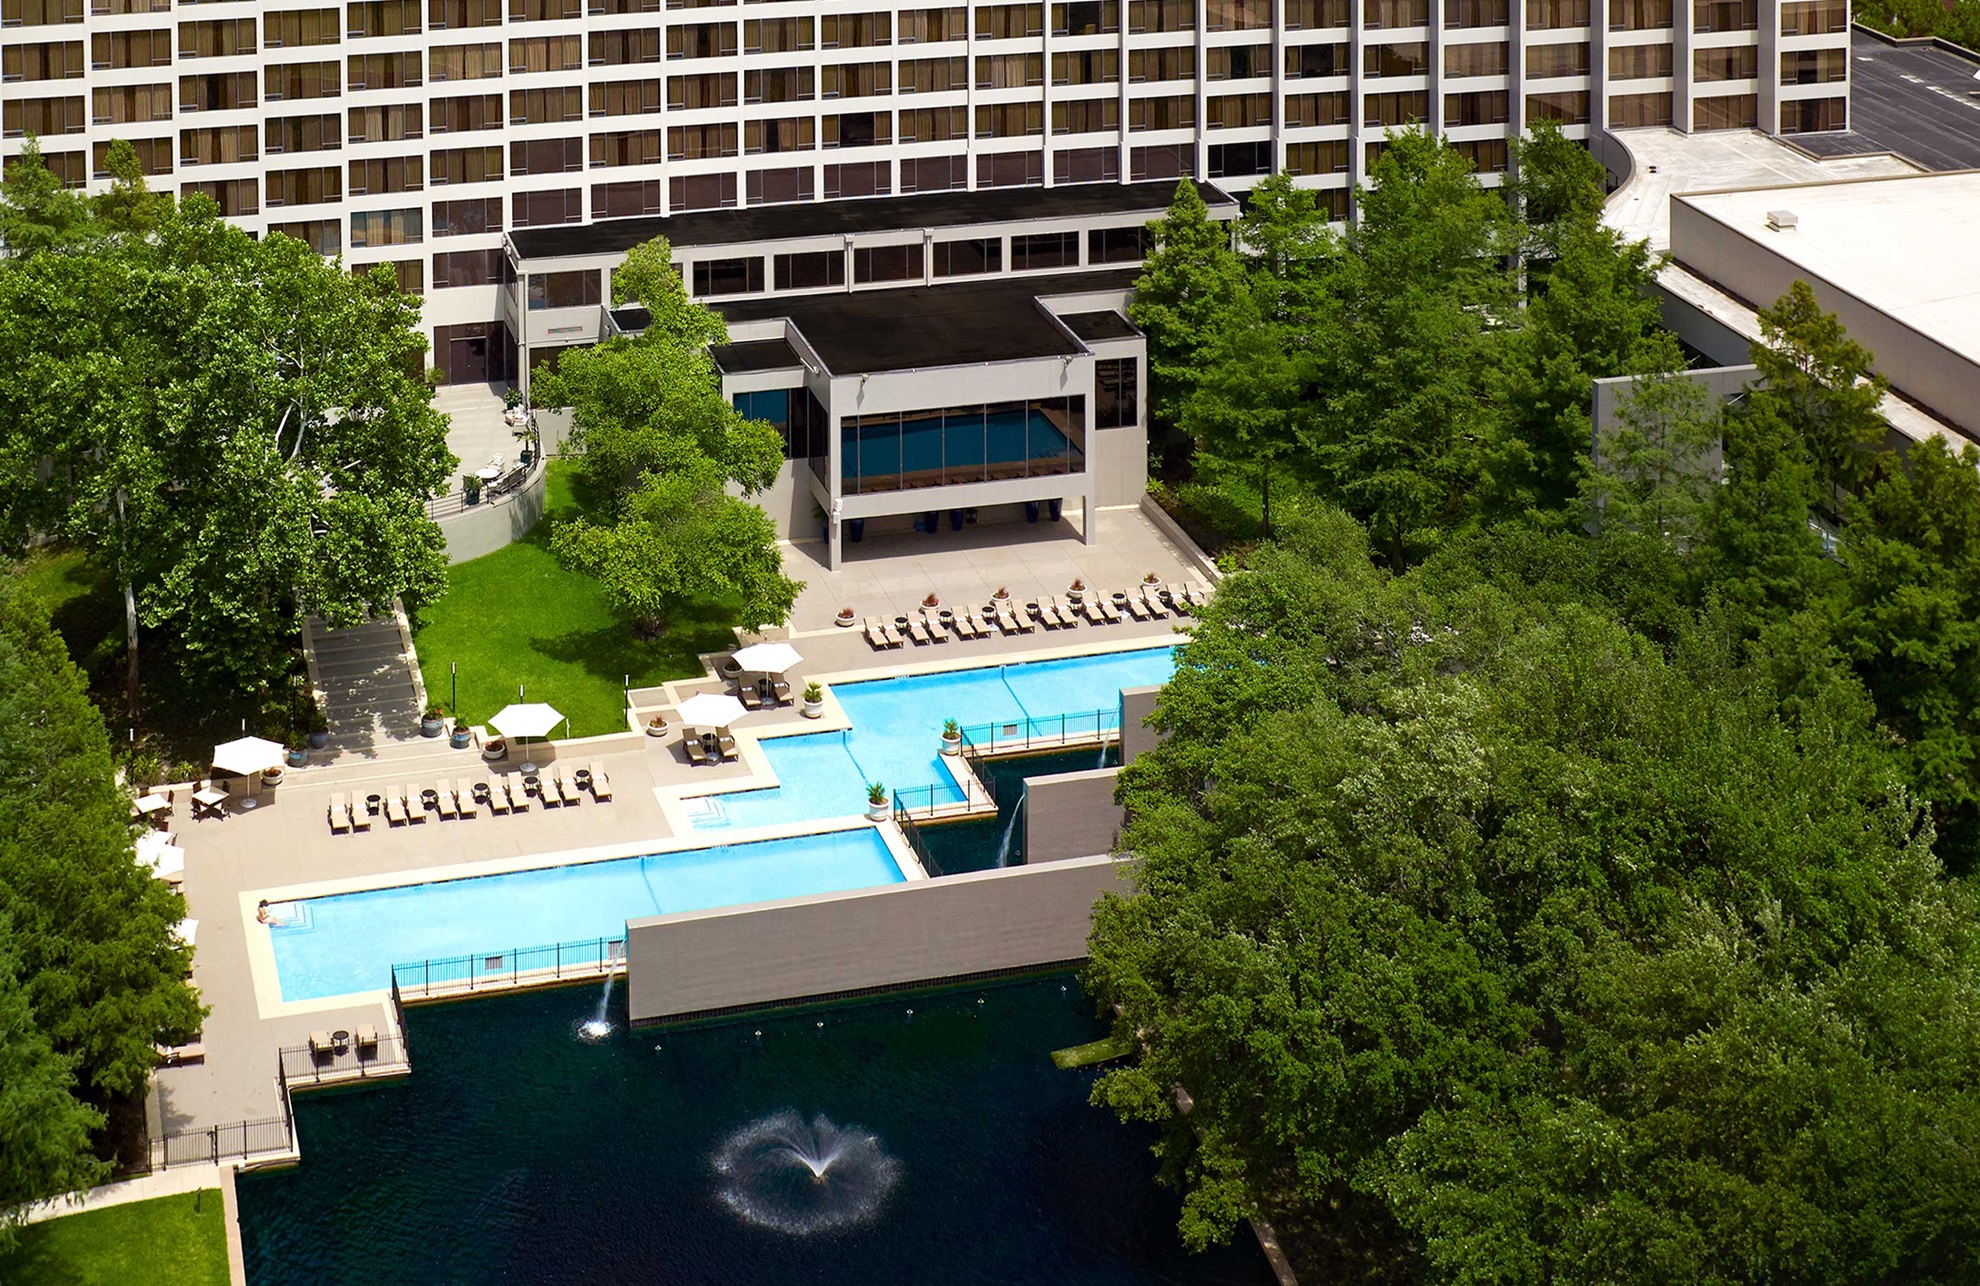 Aerial view of hotel and pool area.